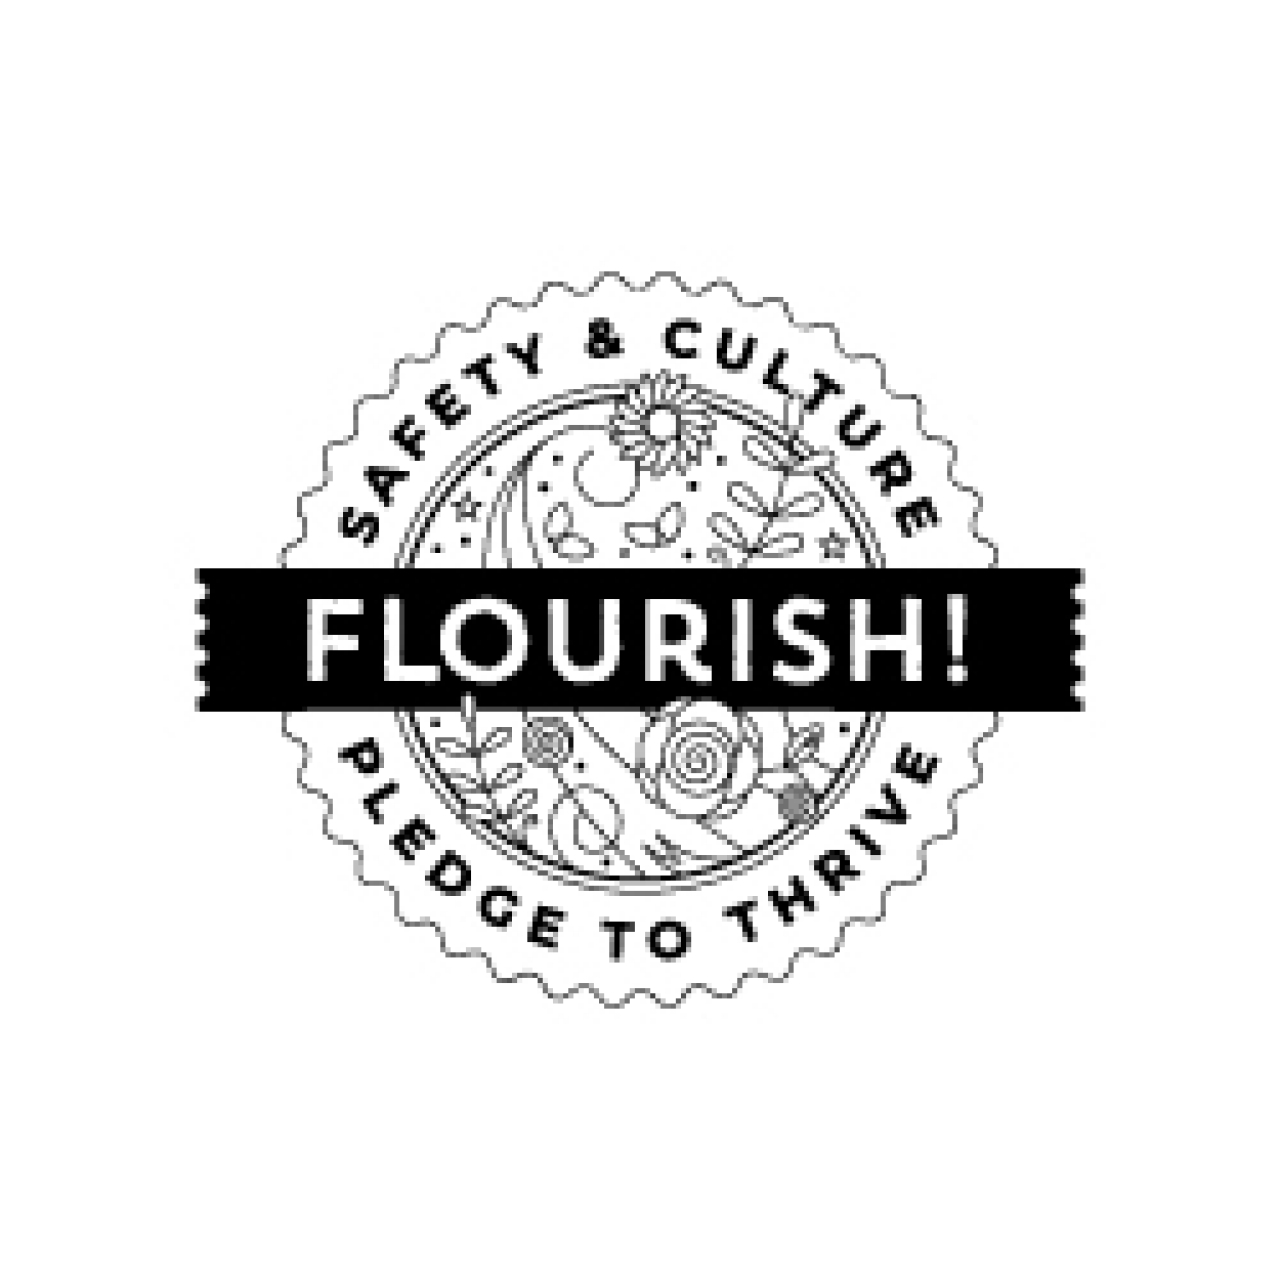 Logo Design for Thrive Restaurant Group that uses line to create the concept of flourish